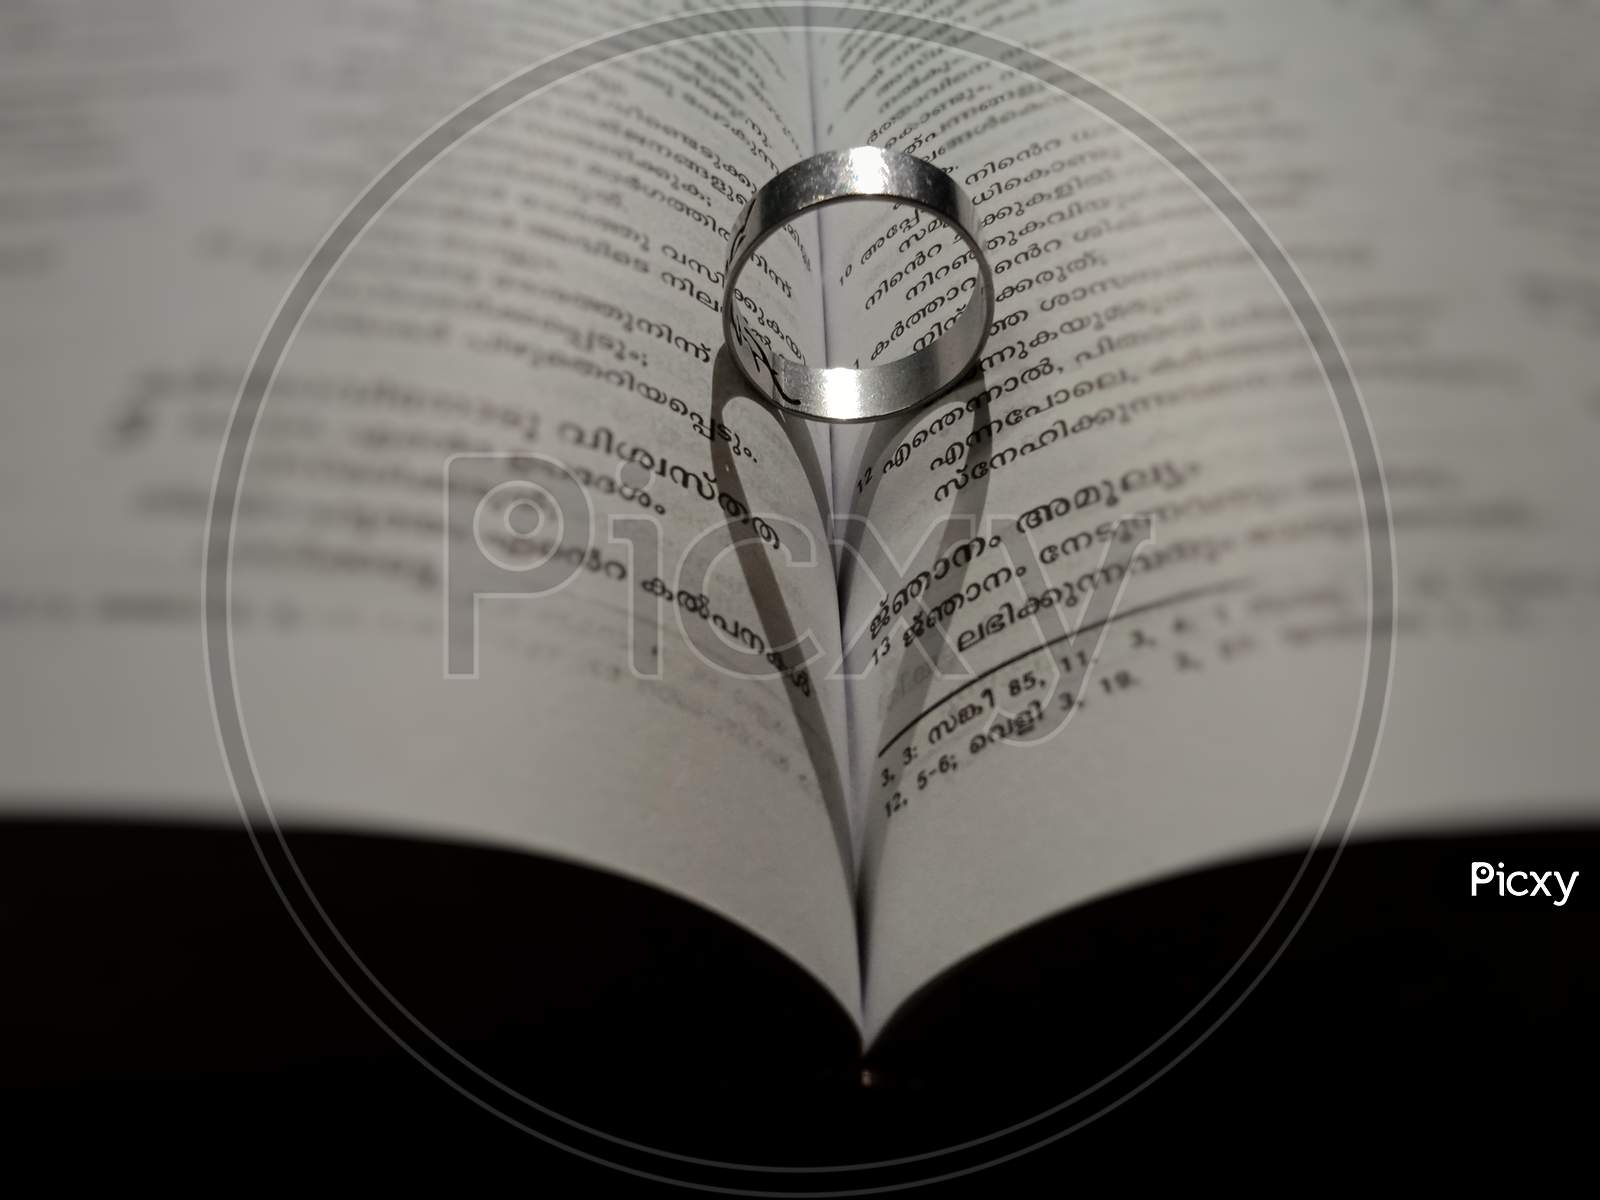 Ring and a heart on a book